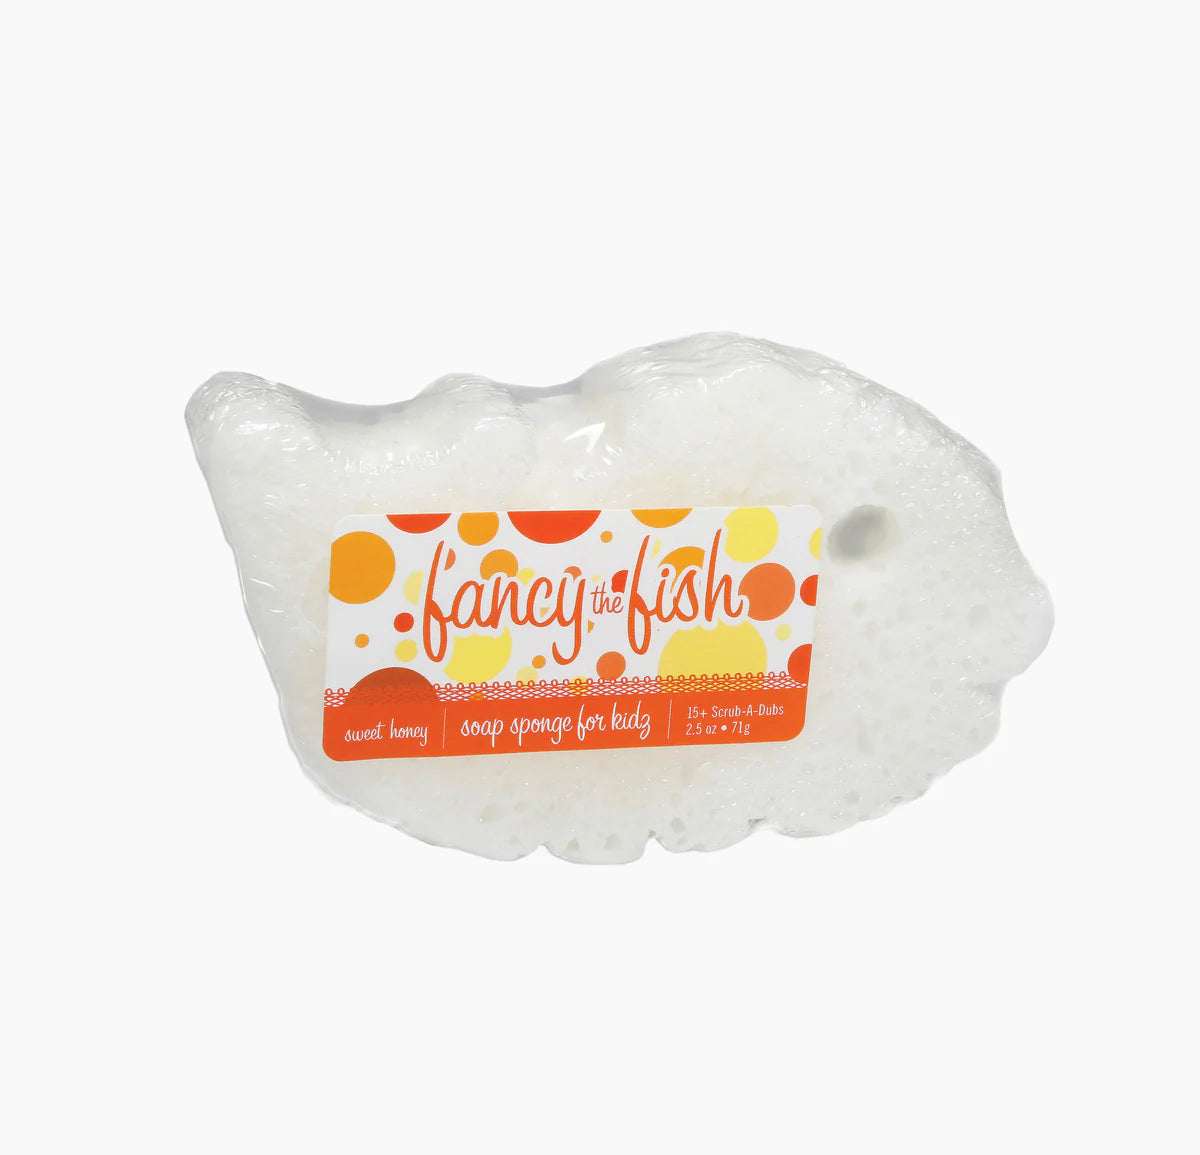 Caren "Fancy the Fish" Soap sponge for kids. Shaped like a fish and white.